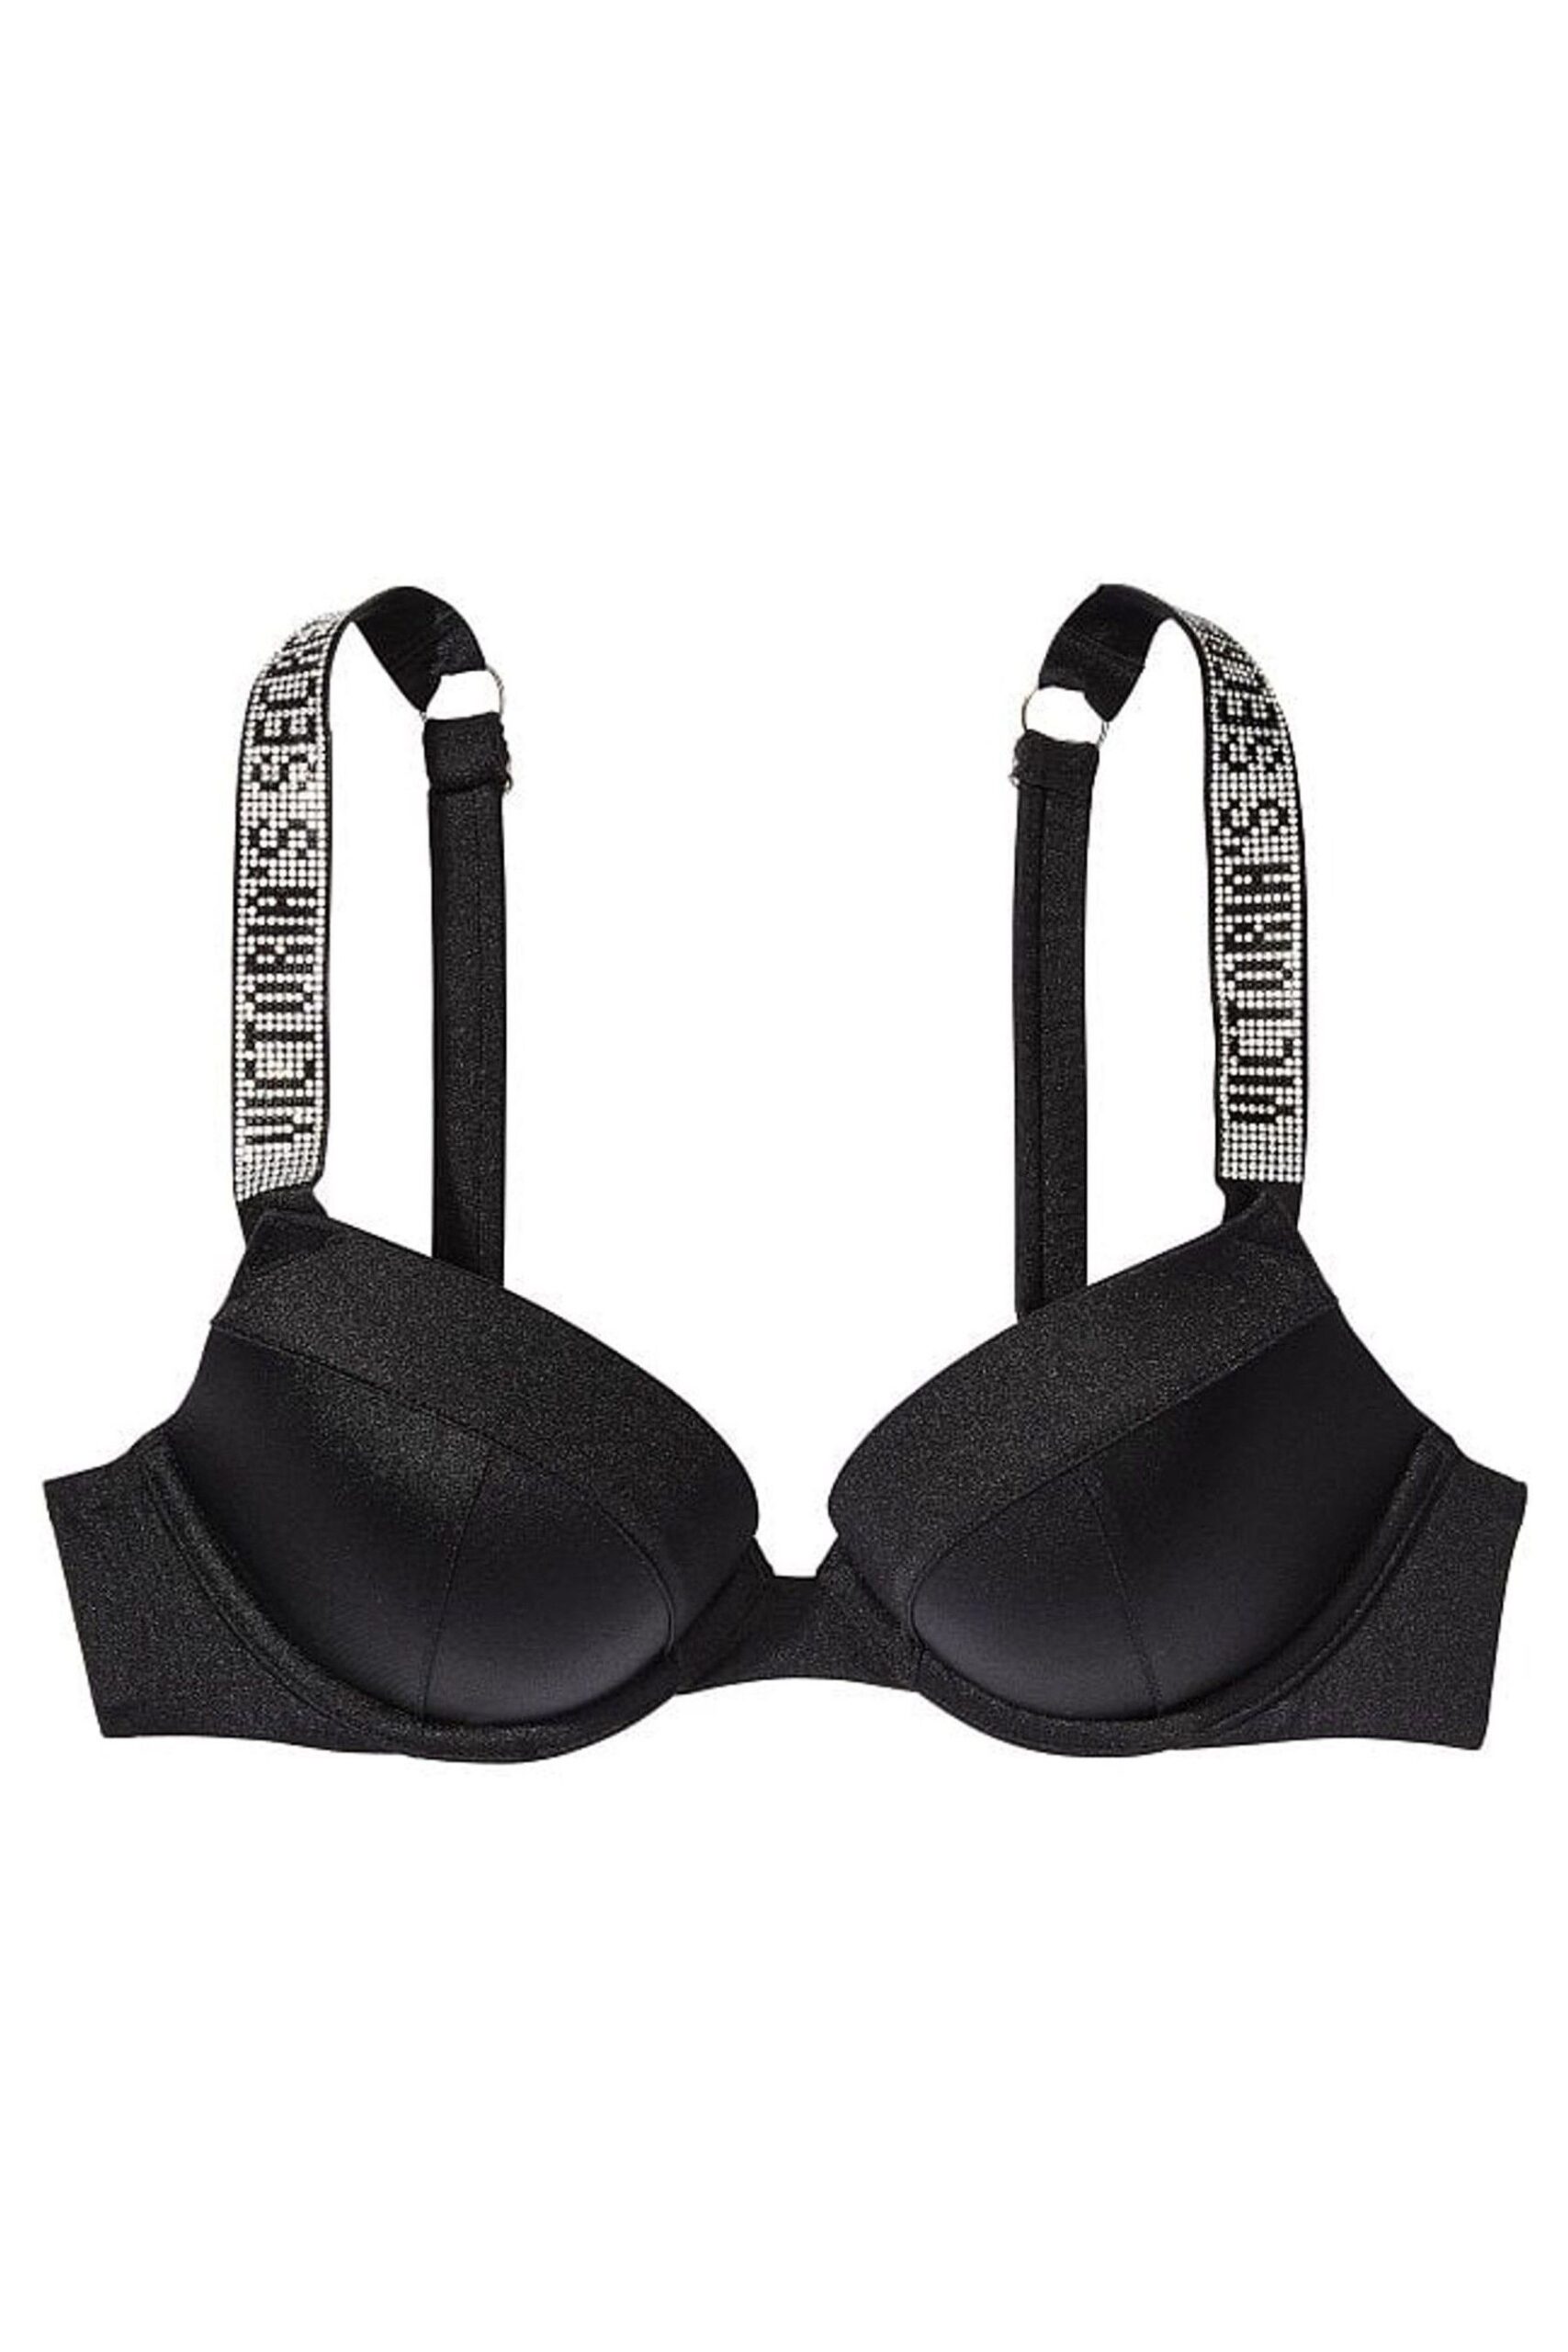 The Ultimate Guide to Choosing the
Perfect Bombshell Bra